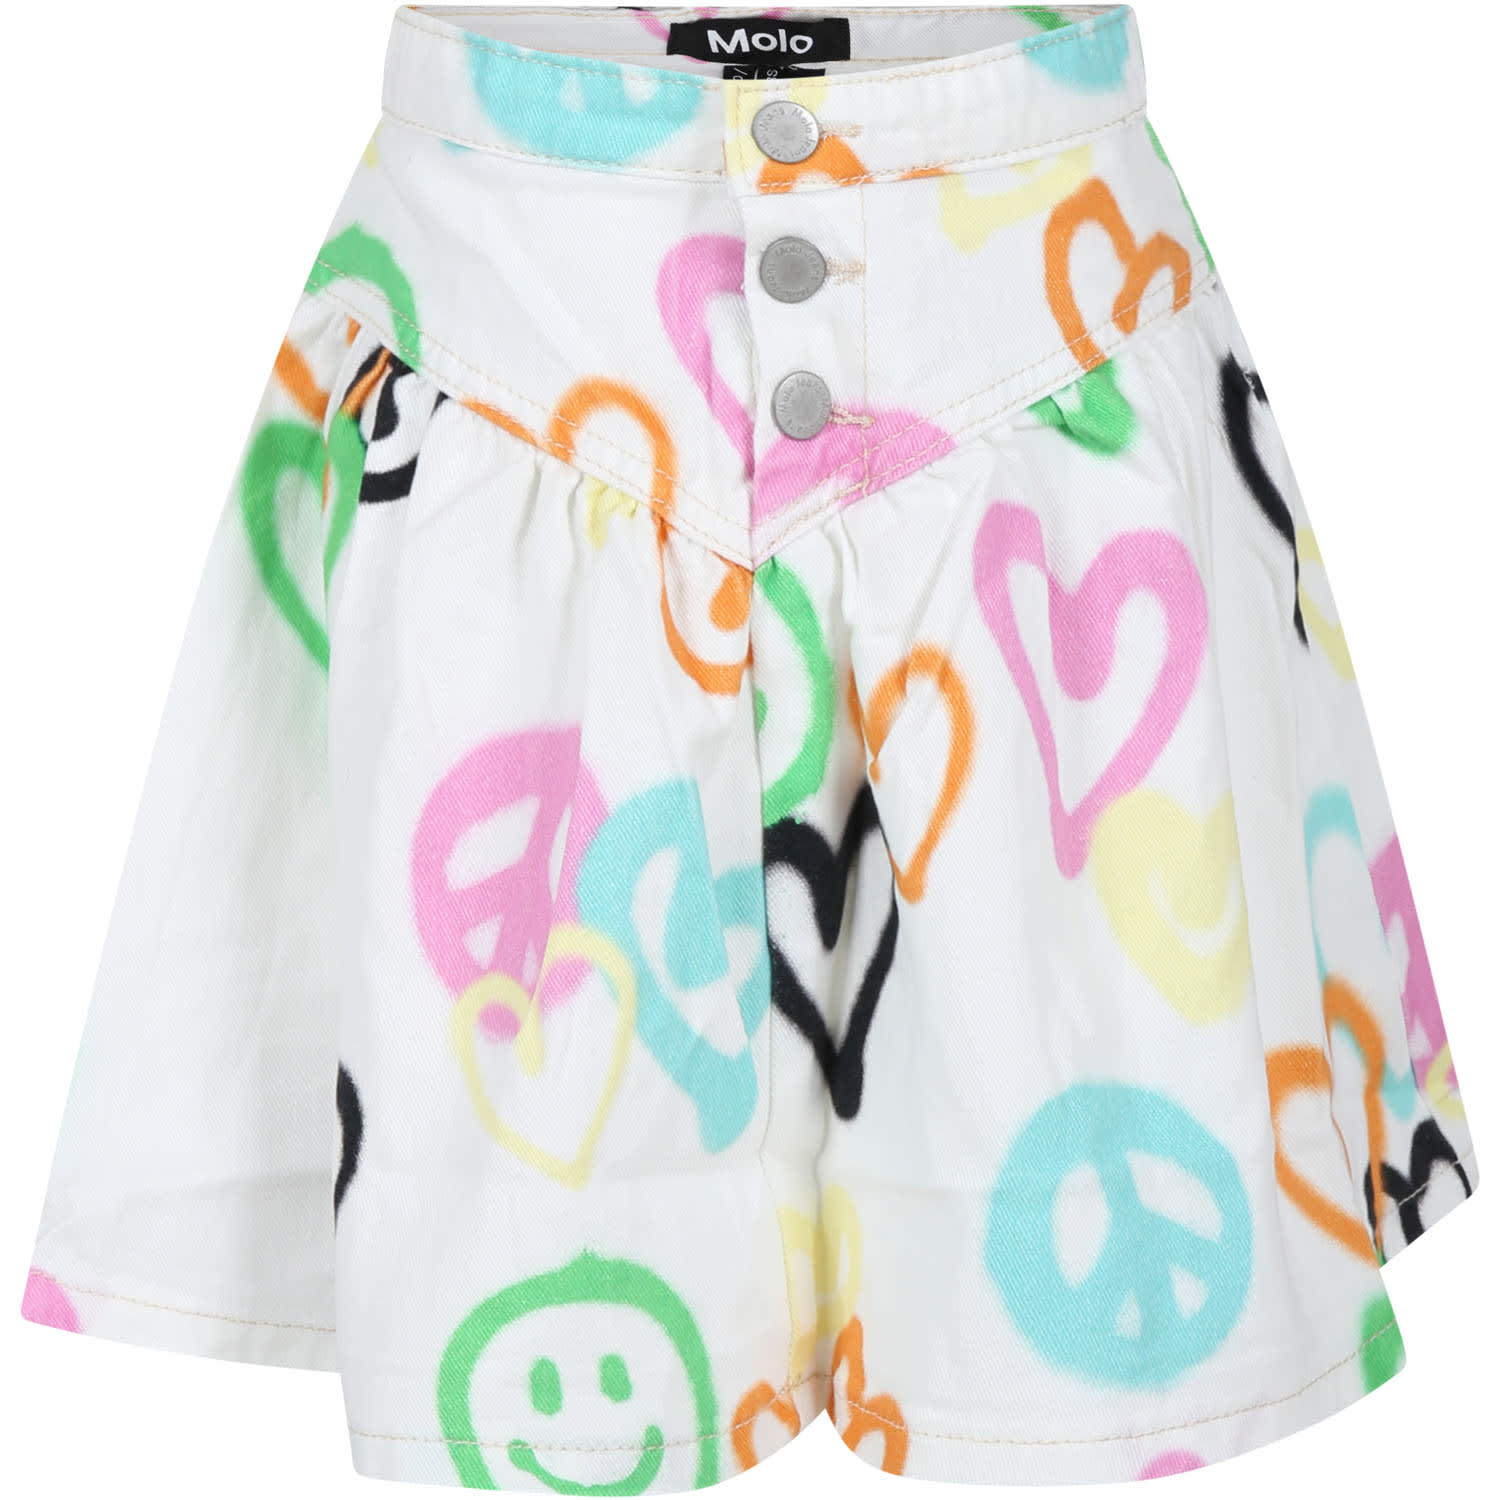 Molo Kids' White Skirt For Girl With Hearts Print